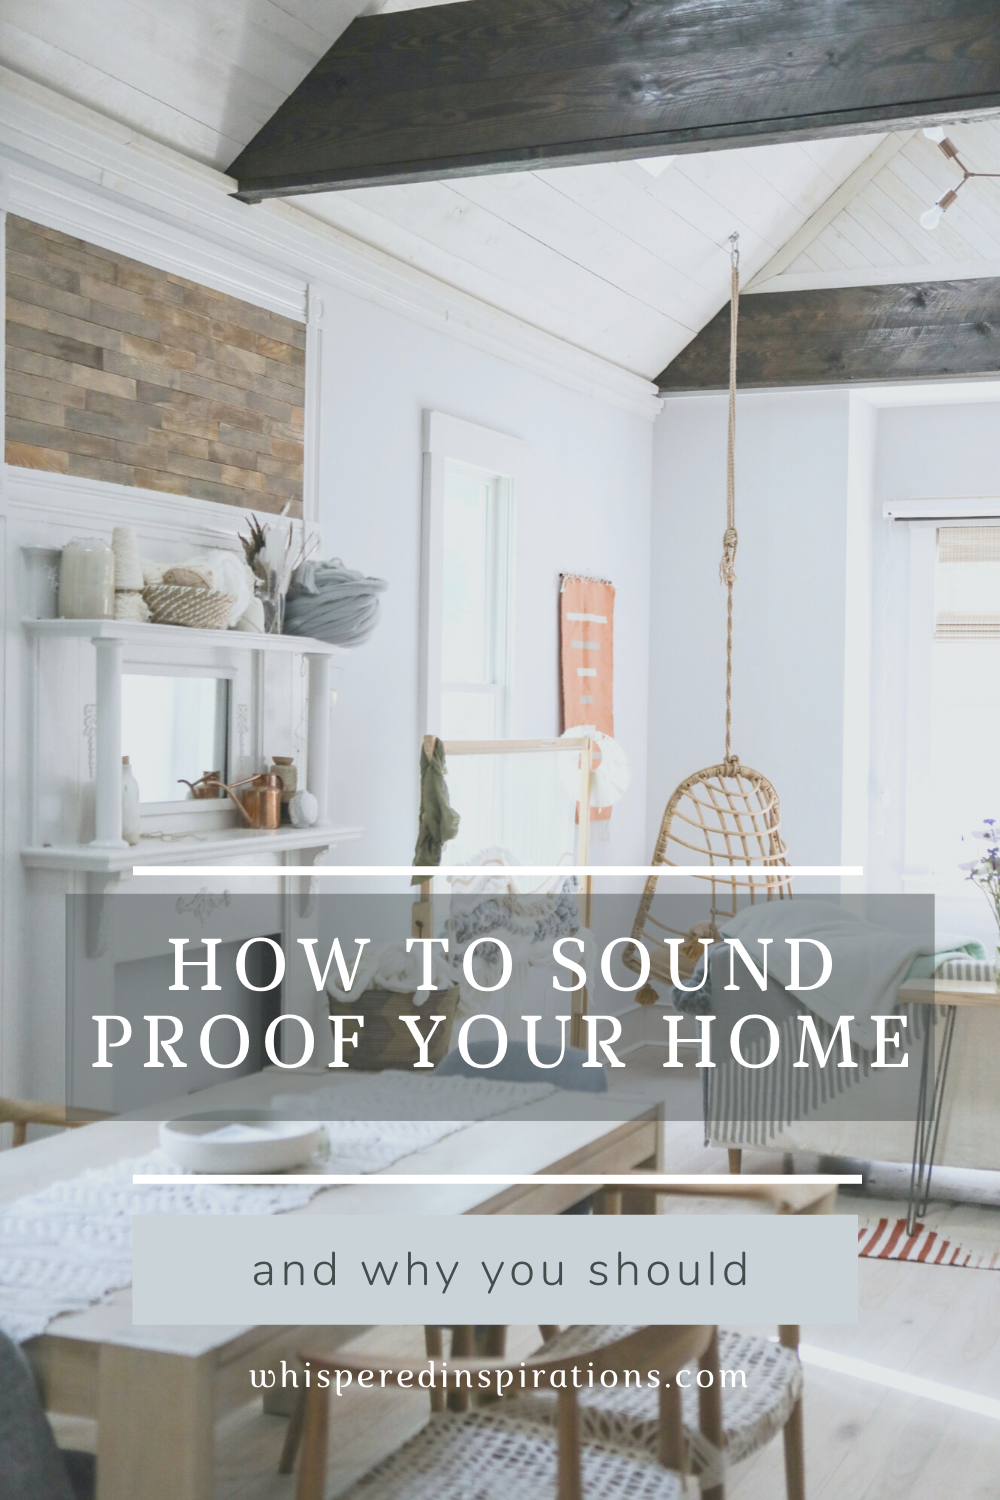 A beautiful bohemian and rustic home. The living room is warm and welcoming. This is article is about how to soundproof your home and why you should.